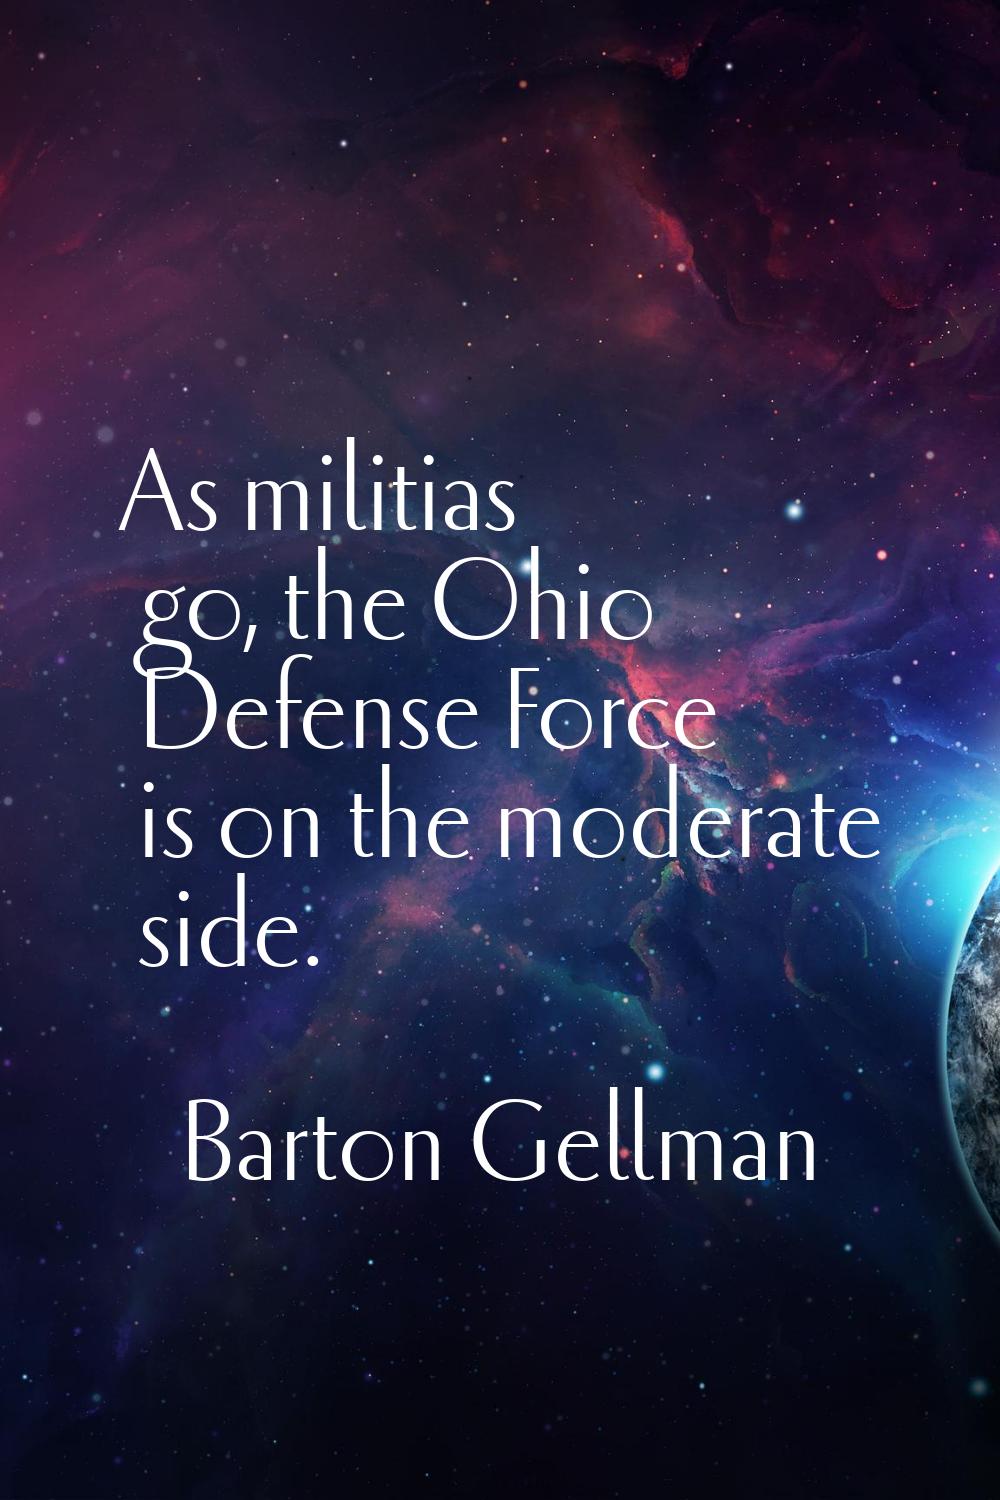 As militias go, the Ohio Defense Force is on the moderate side.